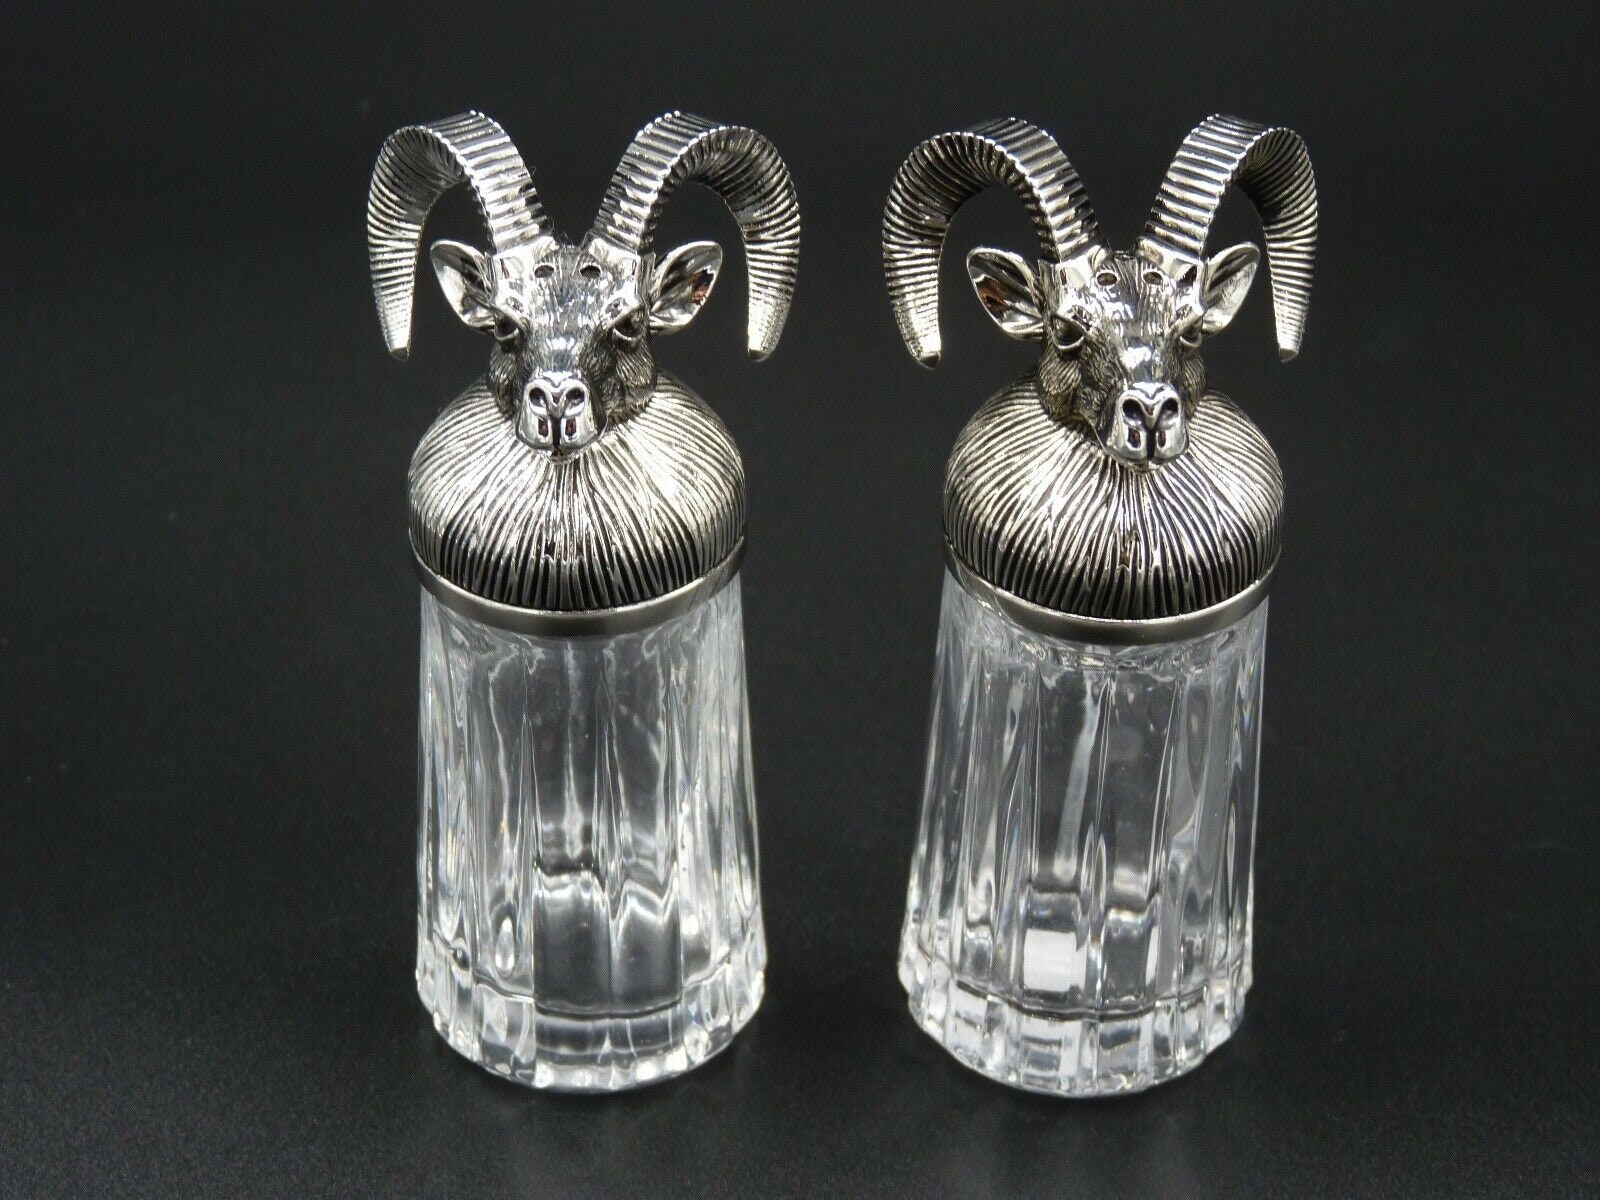 Table Accents By Design Ram Salt & Pepper Shakers